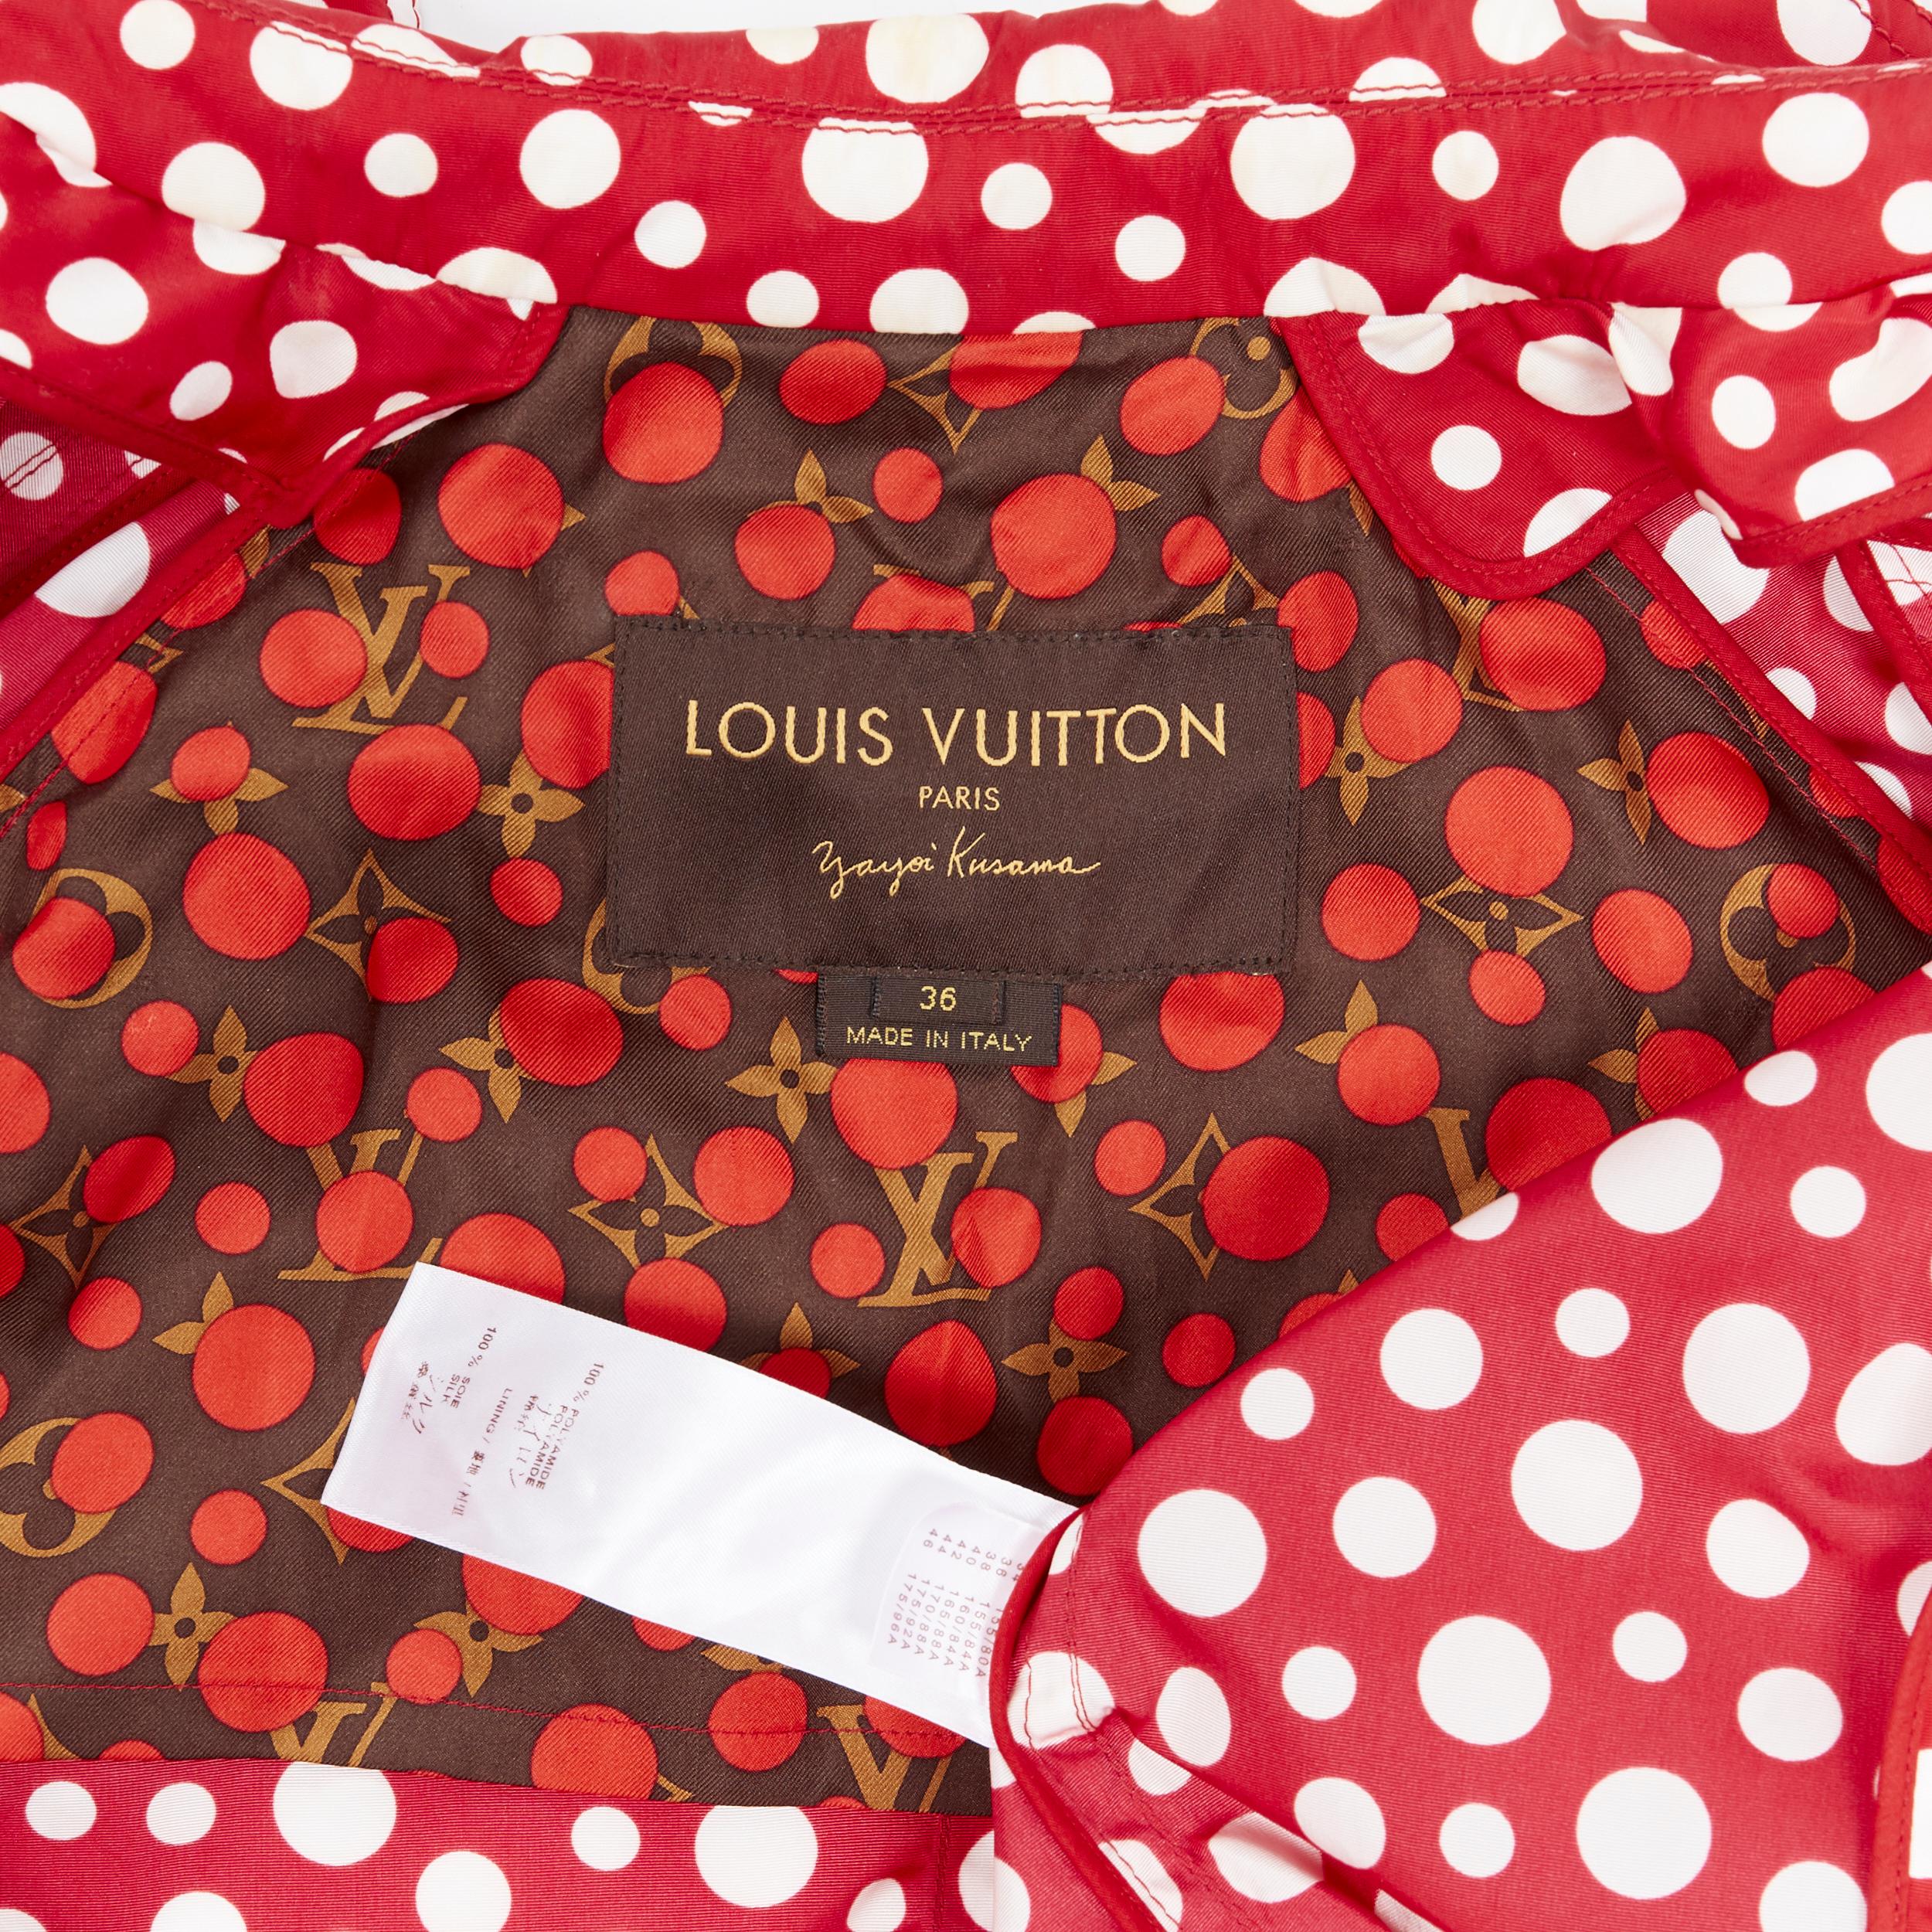 runway LOUIS VUITTON YAYOI KUSAMA red white spot print belted trench coat FR36 S 6